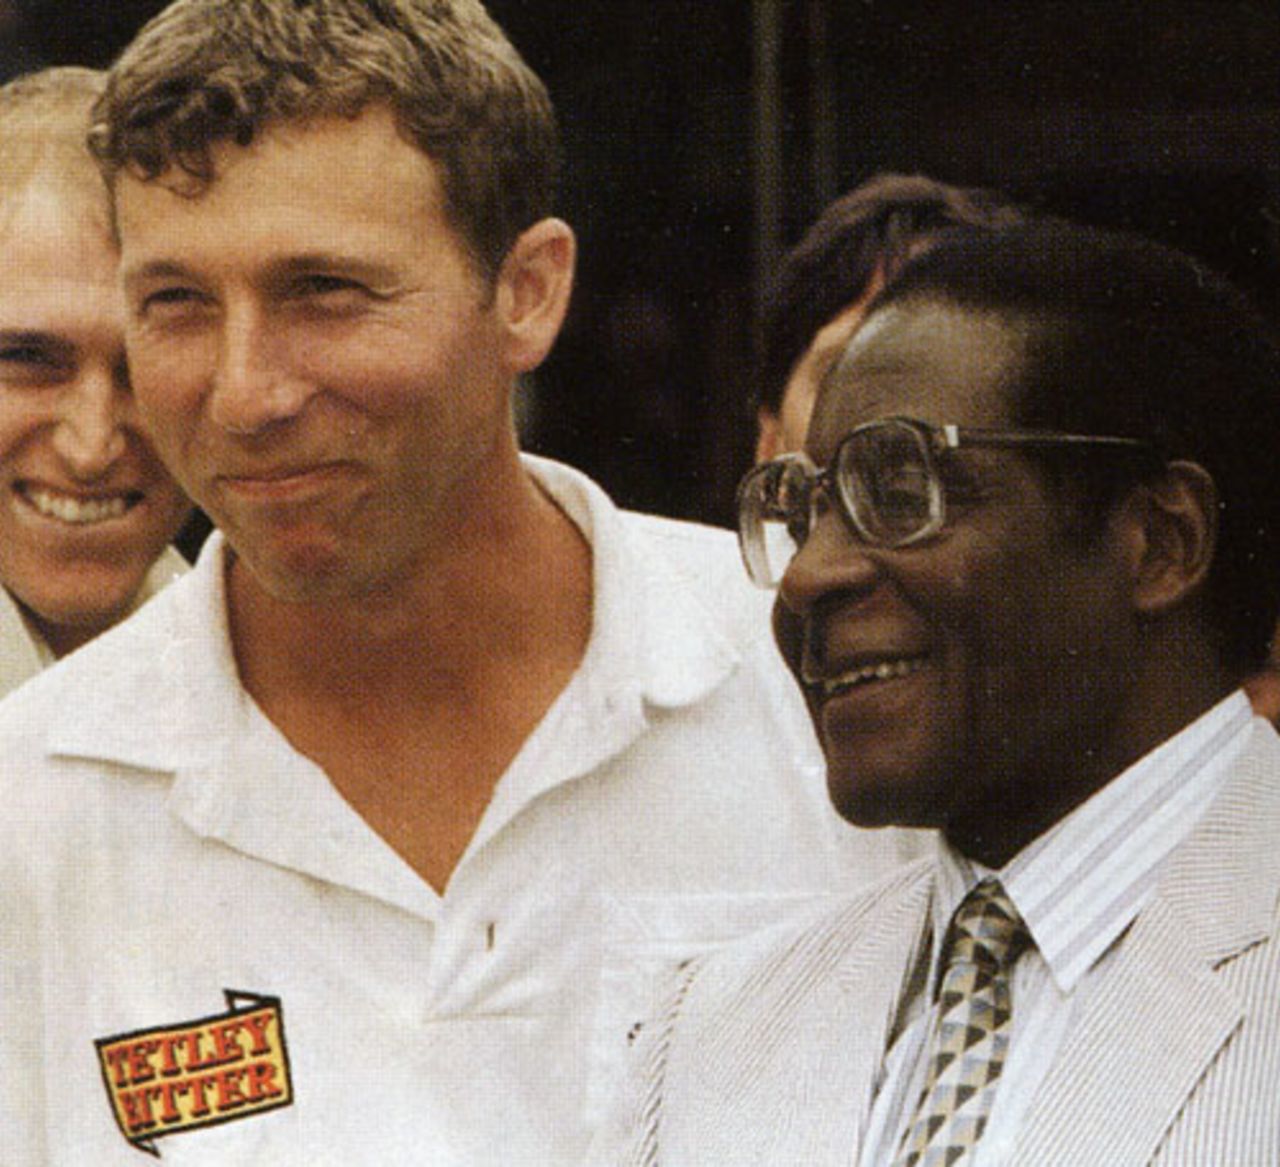 One for the family album: Mike Atherton with a grinning Robert Mugabe, Zimbabwe v England, 2nd Test, Harare, December 28, 1996